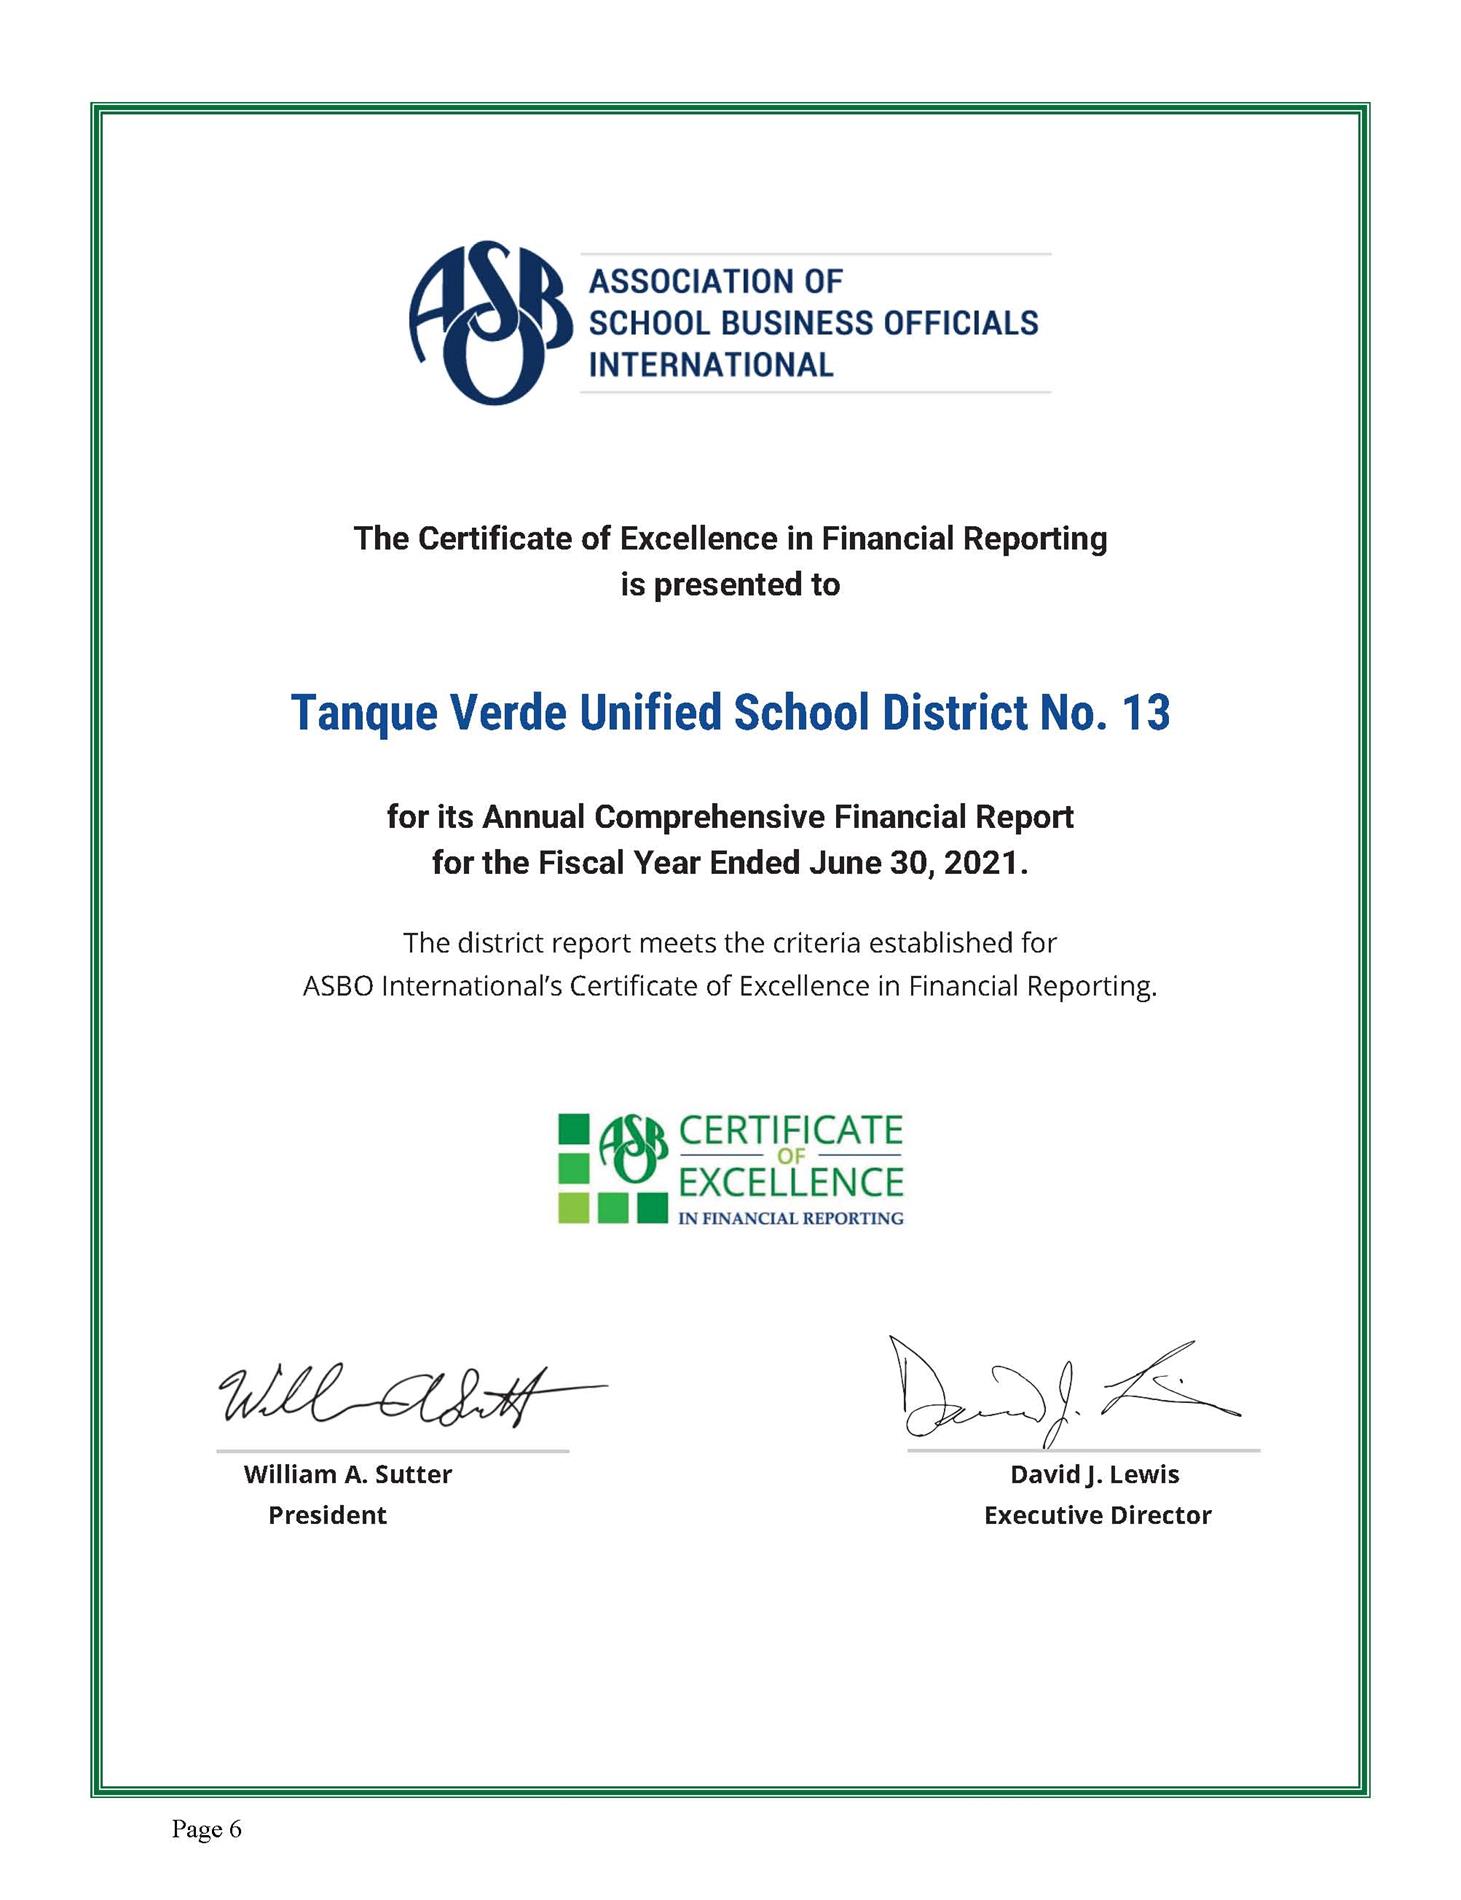 ASBO Certificate of Excellence in Financial Reporting